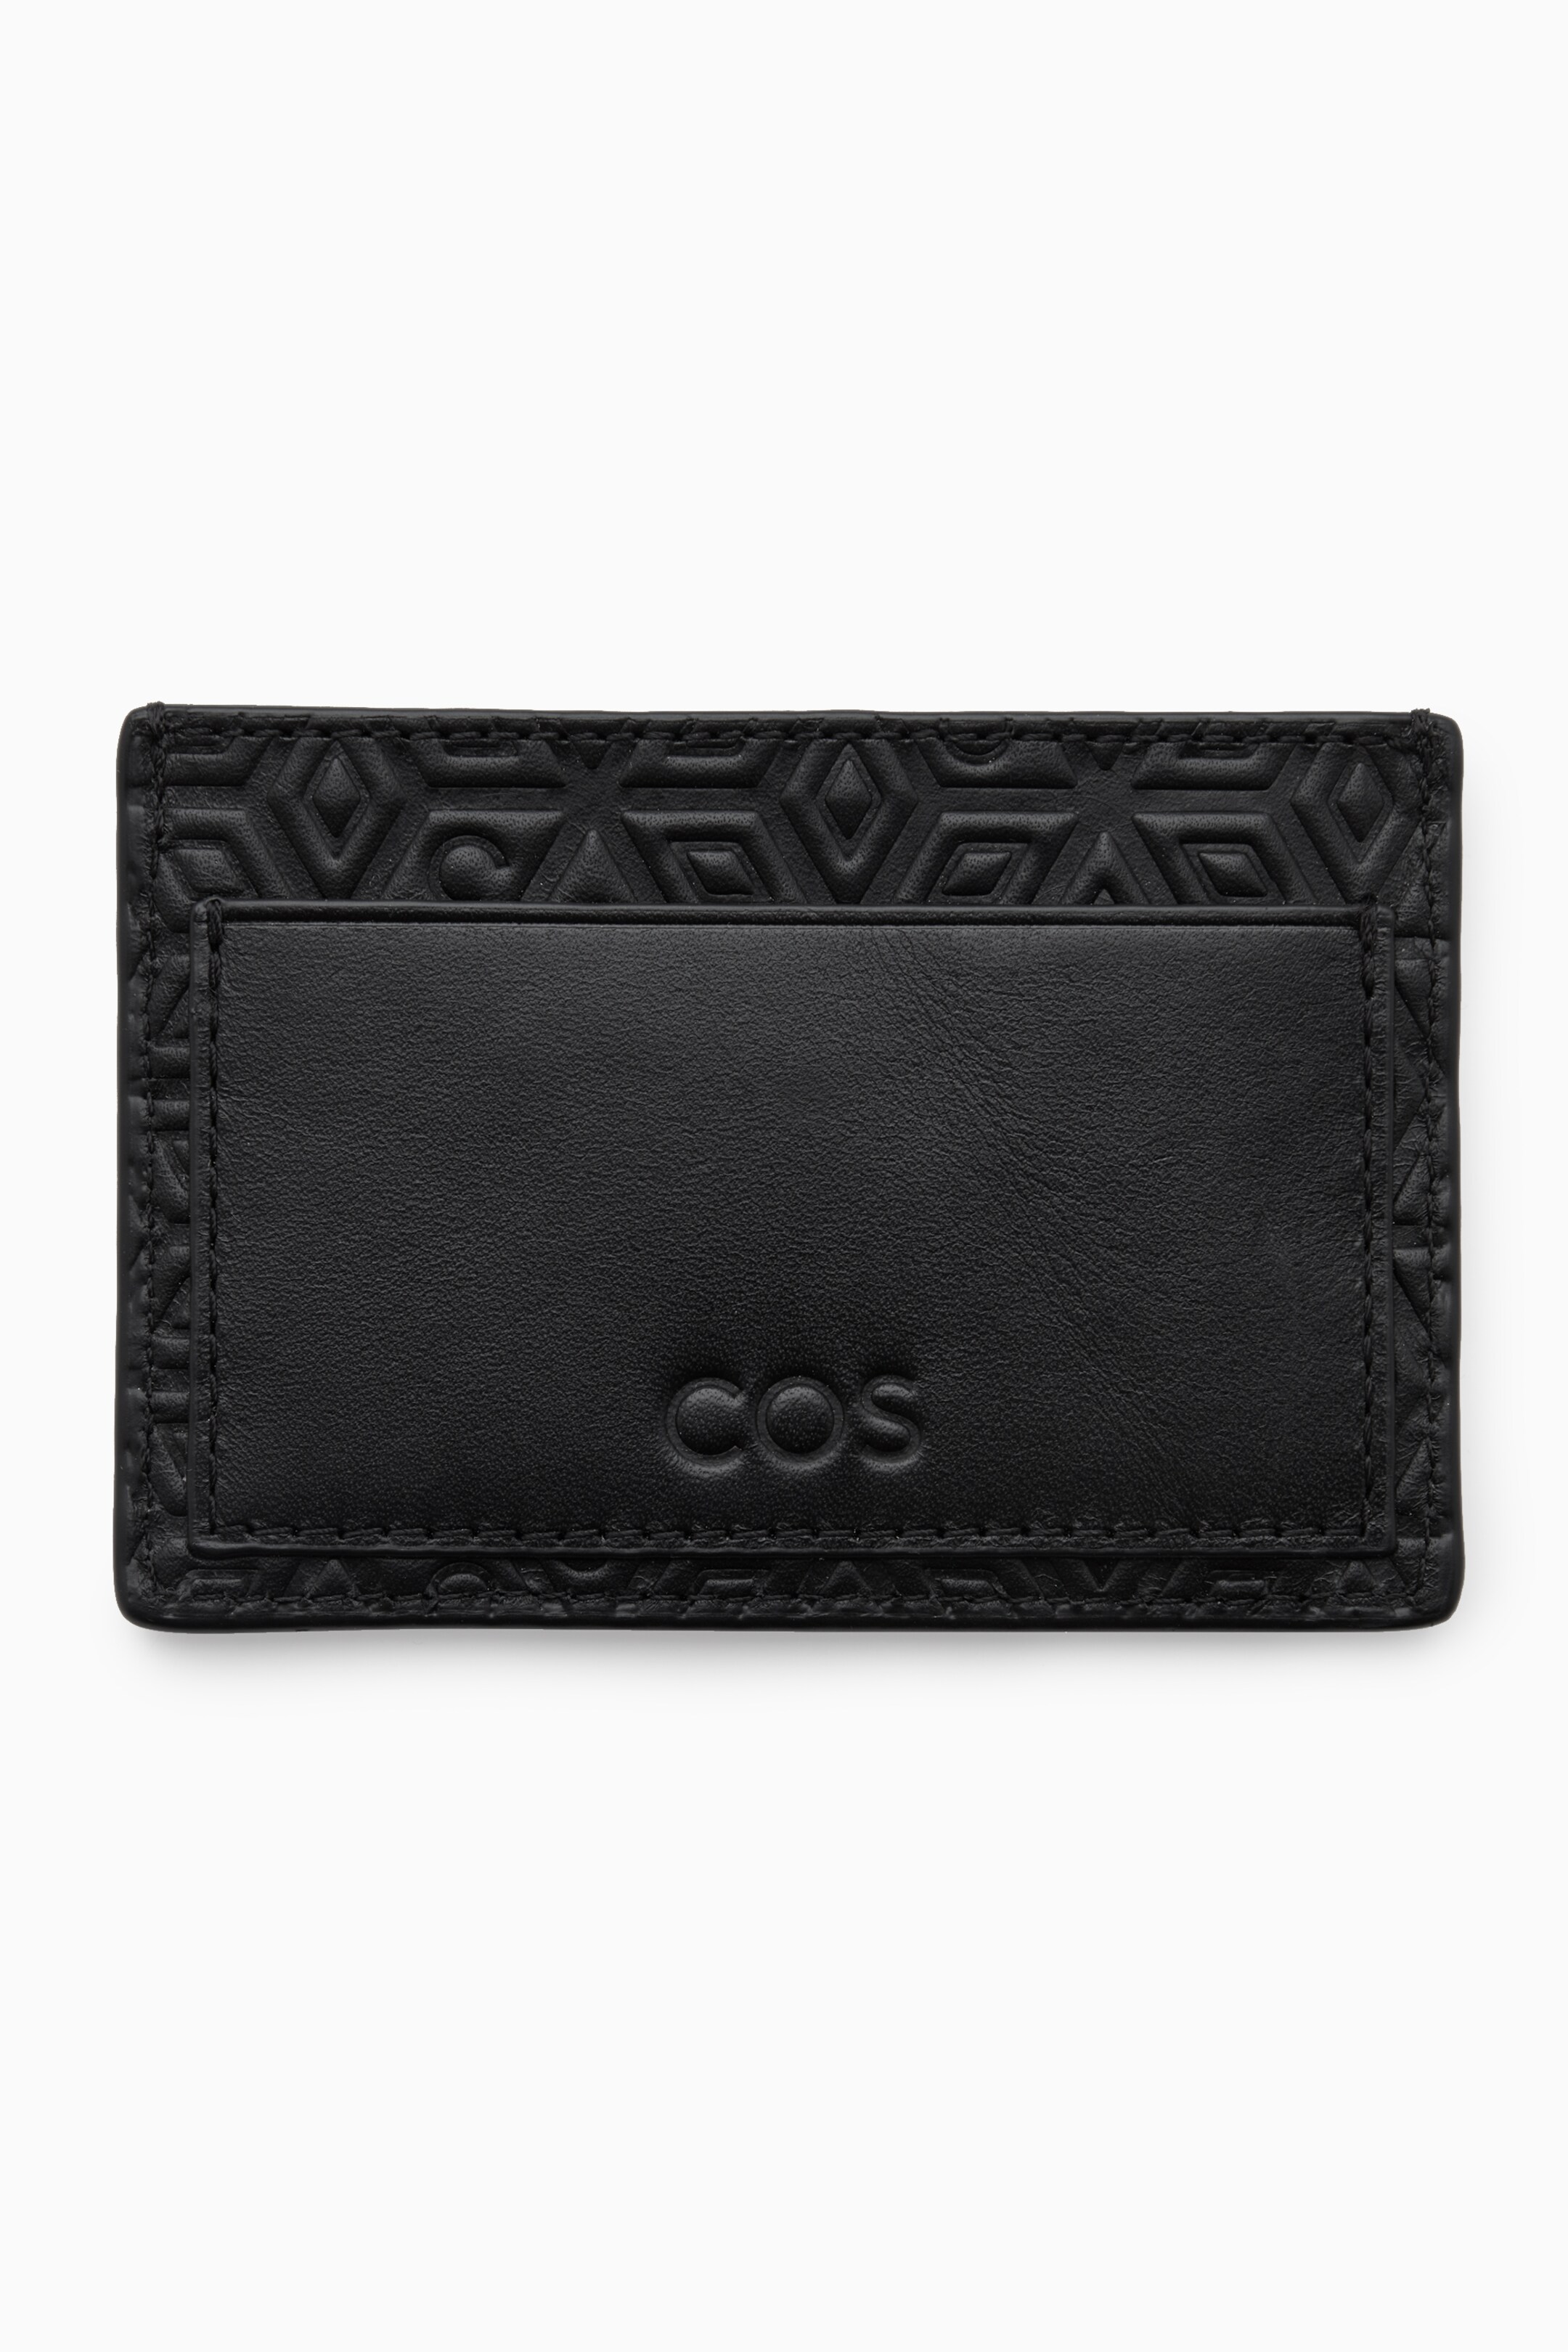 Front image of cos LEATHER CARD HOLDER in BLACK